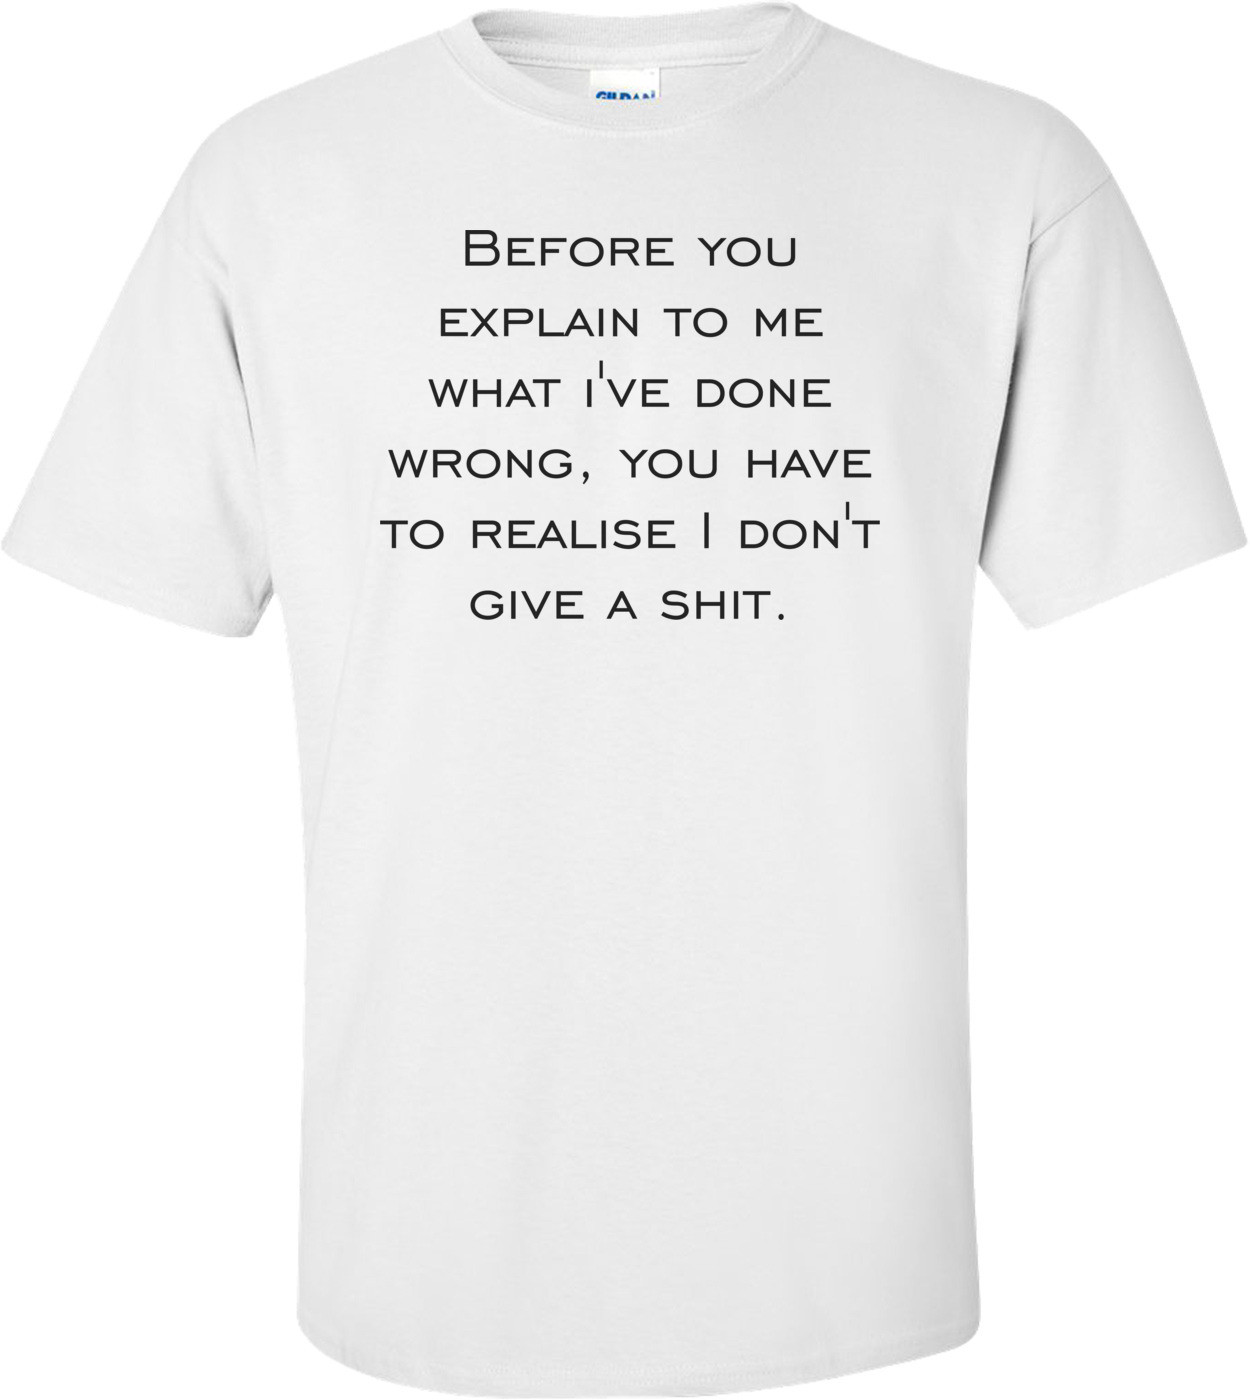 Before you explain to me what i've done wrong, you have to realise I don't give a shit. Shirt